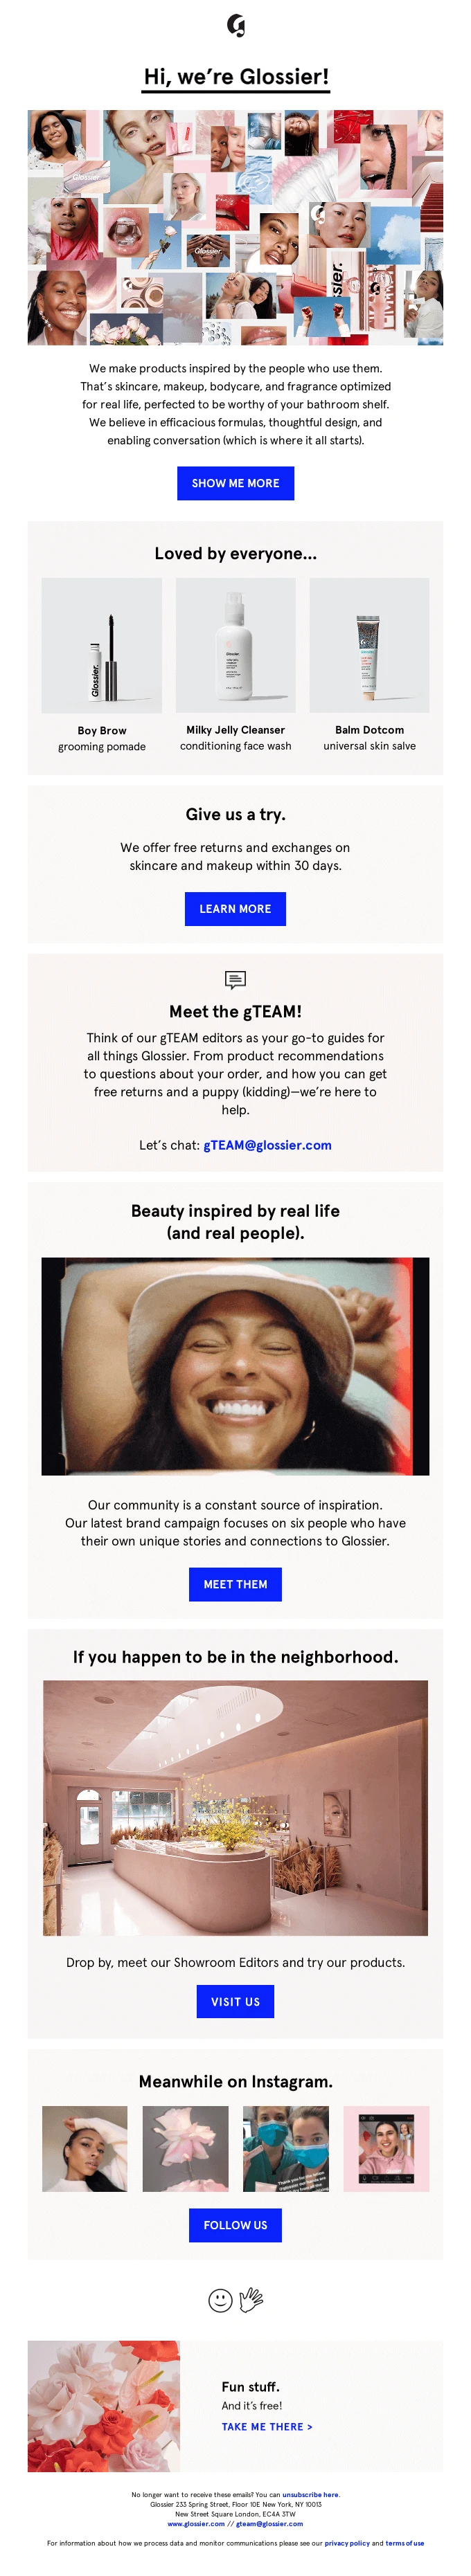 Screenshot of the Glossier Welcome/onboarding email template email